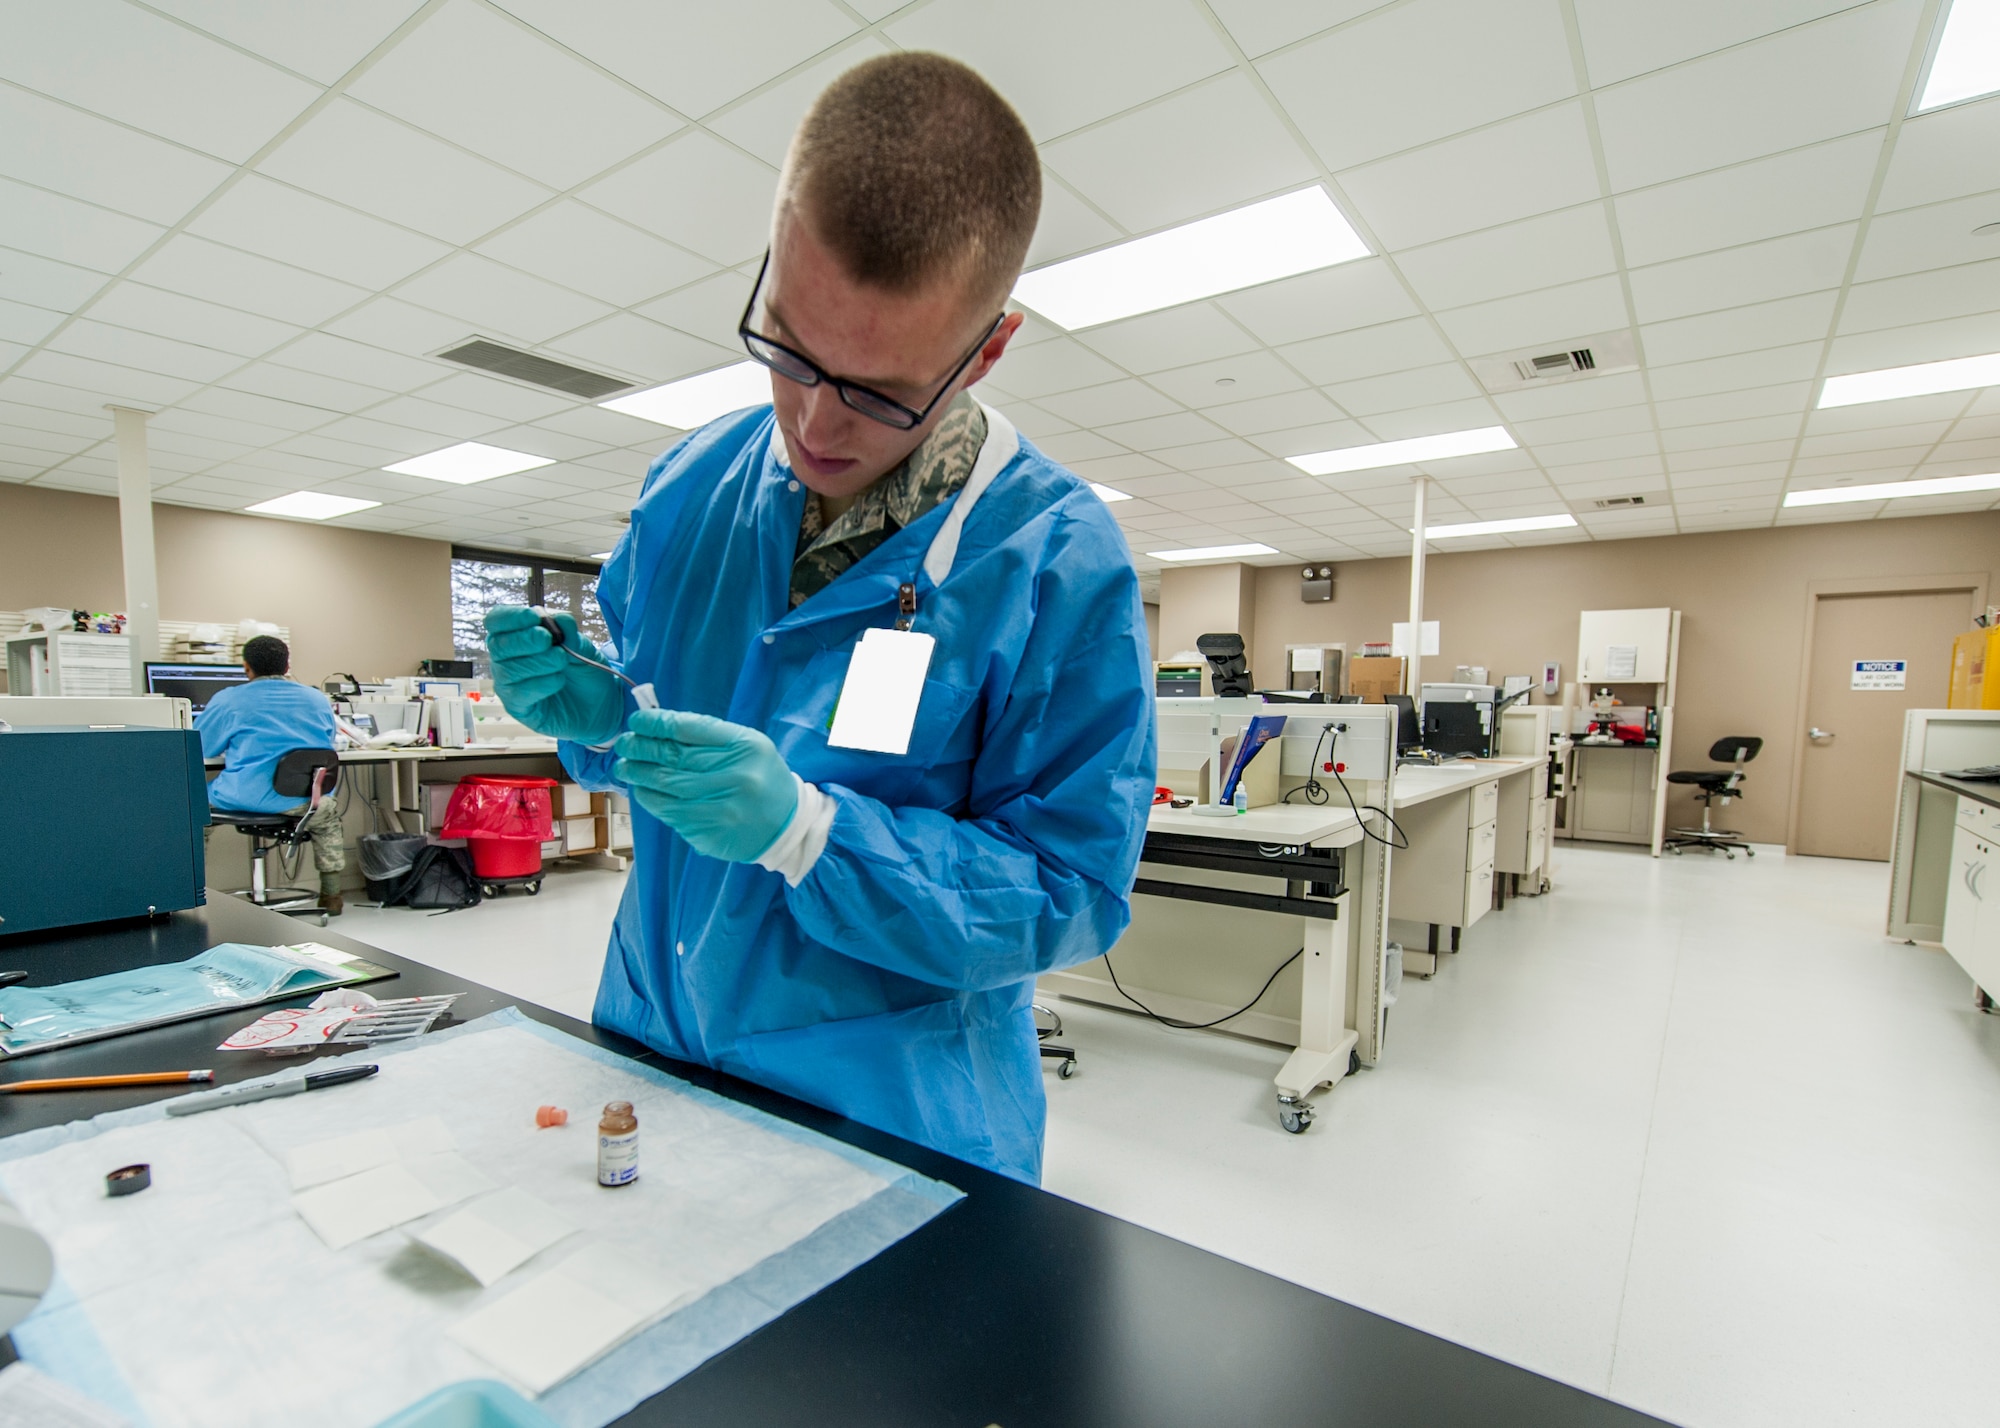 Senior Airman David Gehring, 92nd Medical Support Squadron medical laboratory technician, conducts lab work Dec. 1, 2015, Fairchild Air Force Base, Wash. The average turnaround time for test results is less than two hours with the majority of tests taking between 30 minutes to an hour. (U.S. Air Force illustration/Airman 1st Class Sean Campbell)